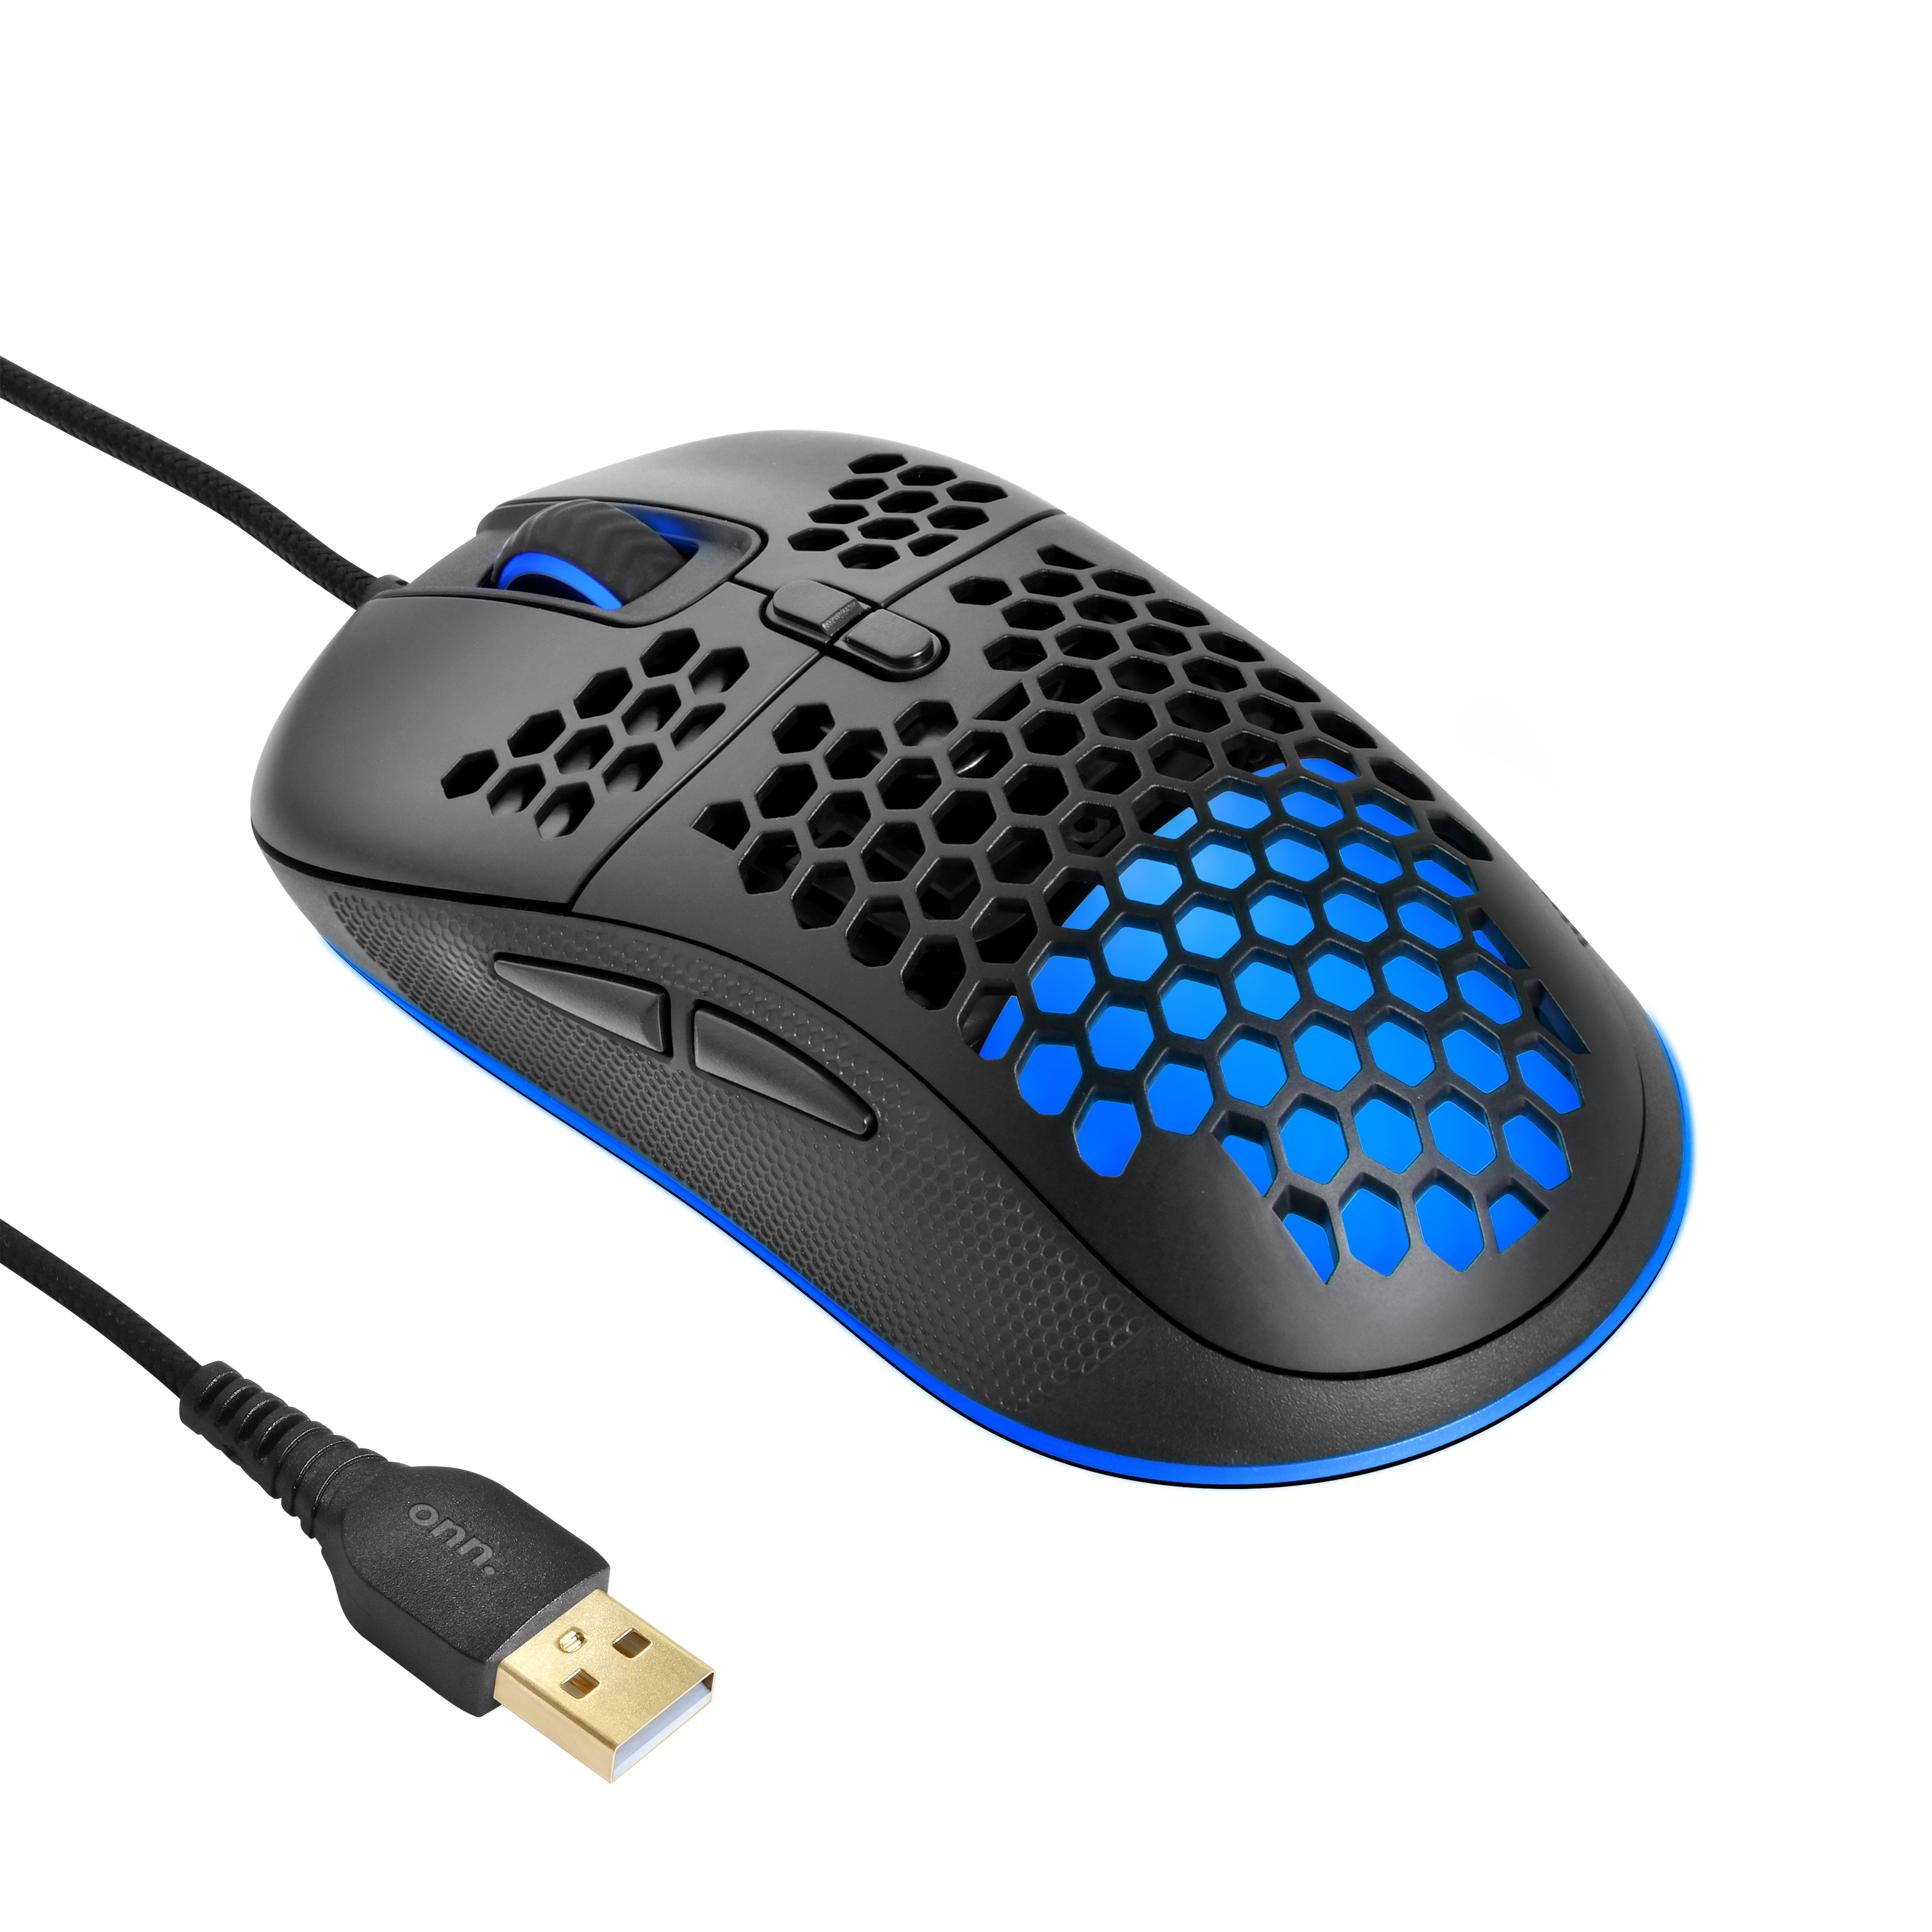 onn. Lightweight Gaming Mouse with LED Lighting and 7 Programmable Buttons, Adjustable 200-7200 DPI - image 4 of 13